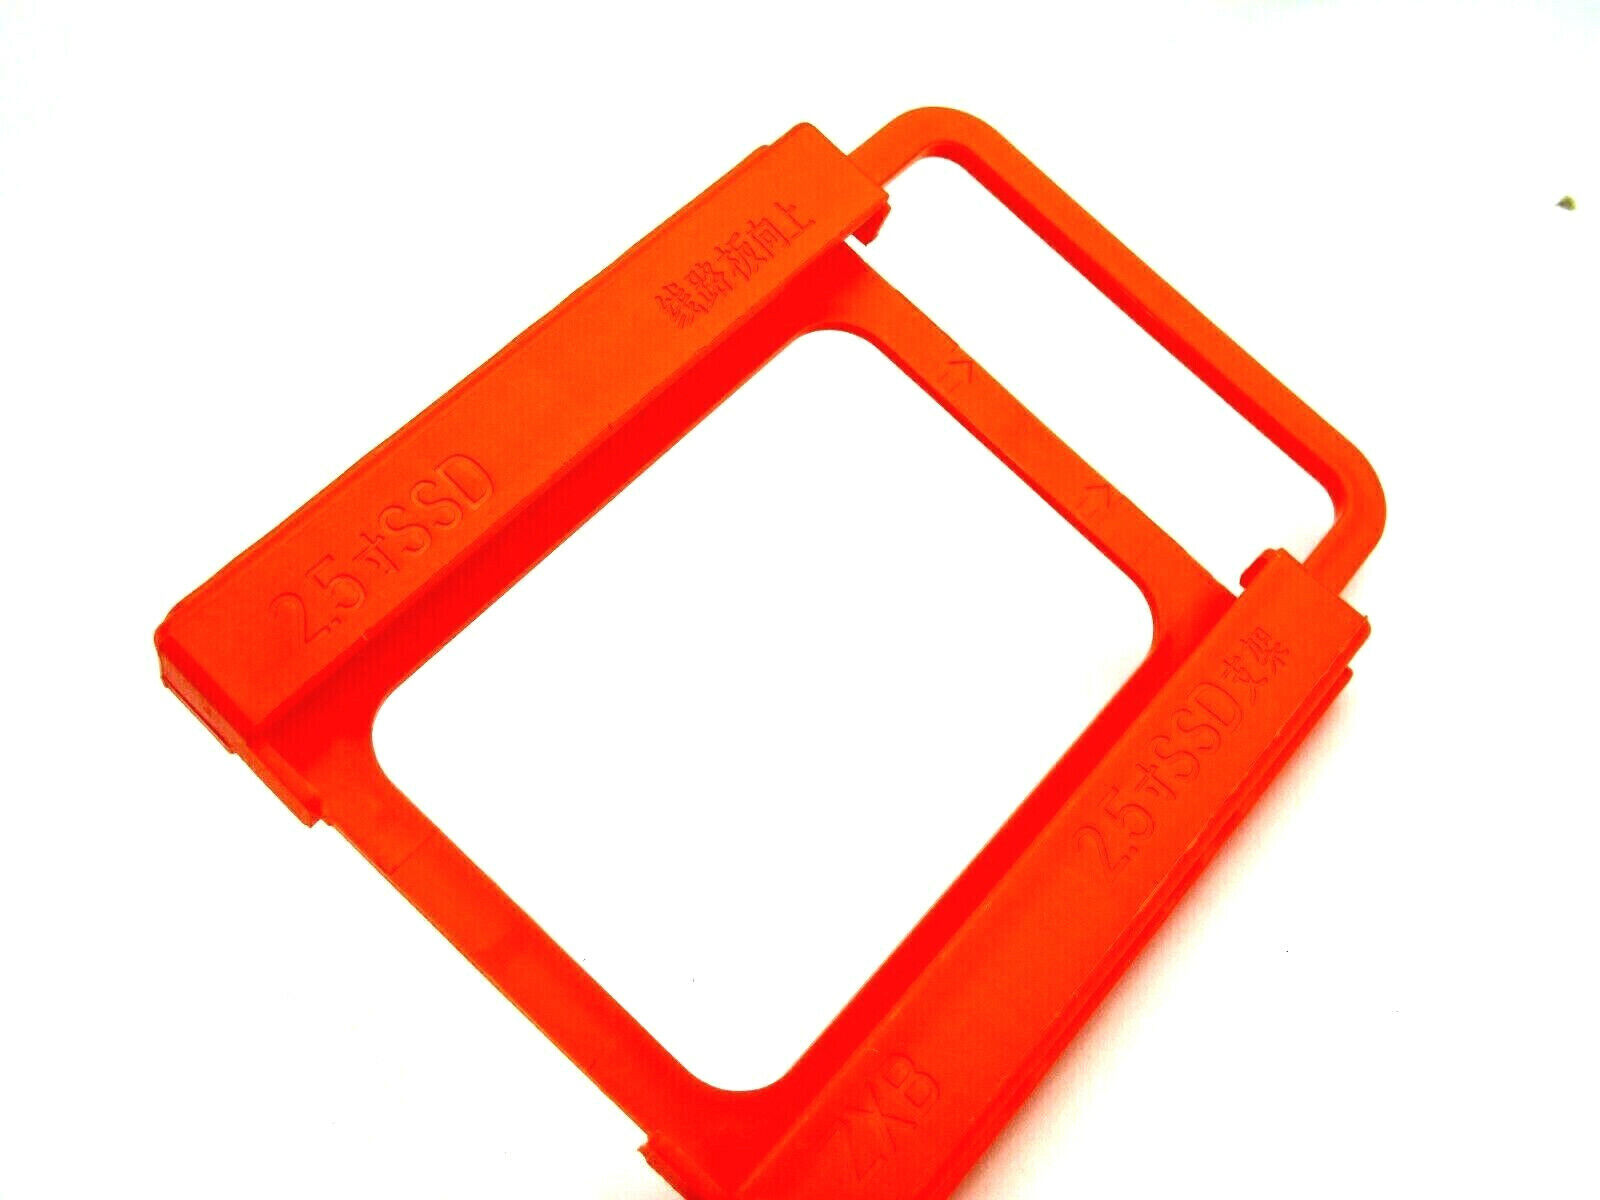 Lot of 10 2.5" to 3.5" Adapter SSD HDD Mounting Bracket Tray Caddy Bay Unbranded Does Not Apply - фотография #7